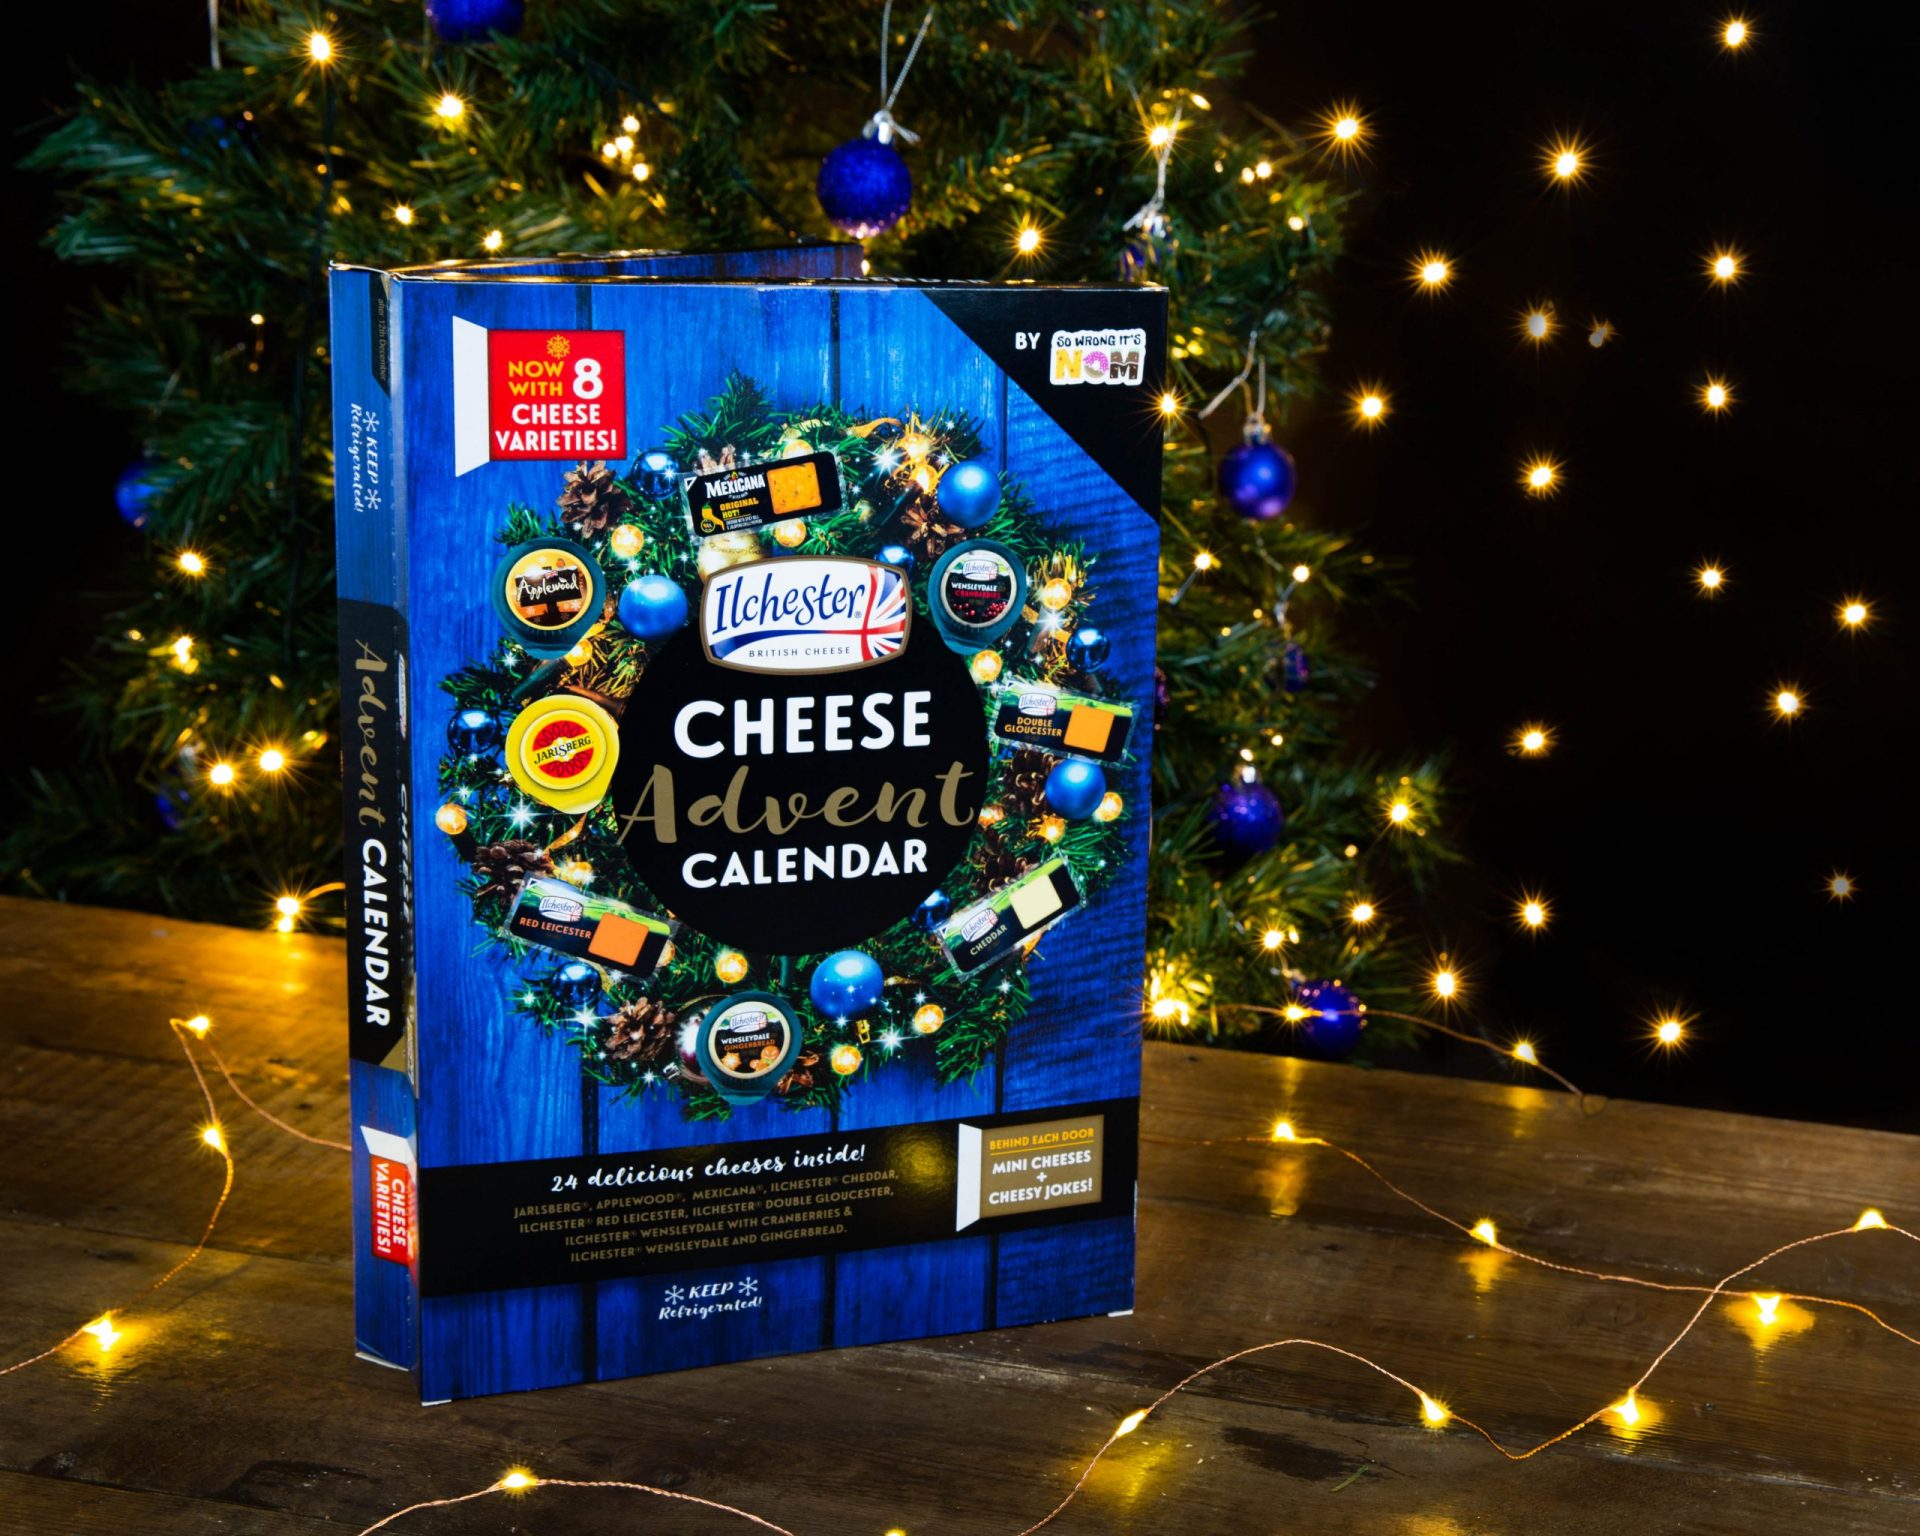 Try This A Cheese Advent Calendar Good Food RevolutionGood Food